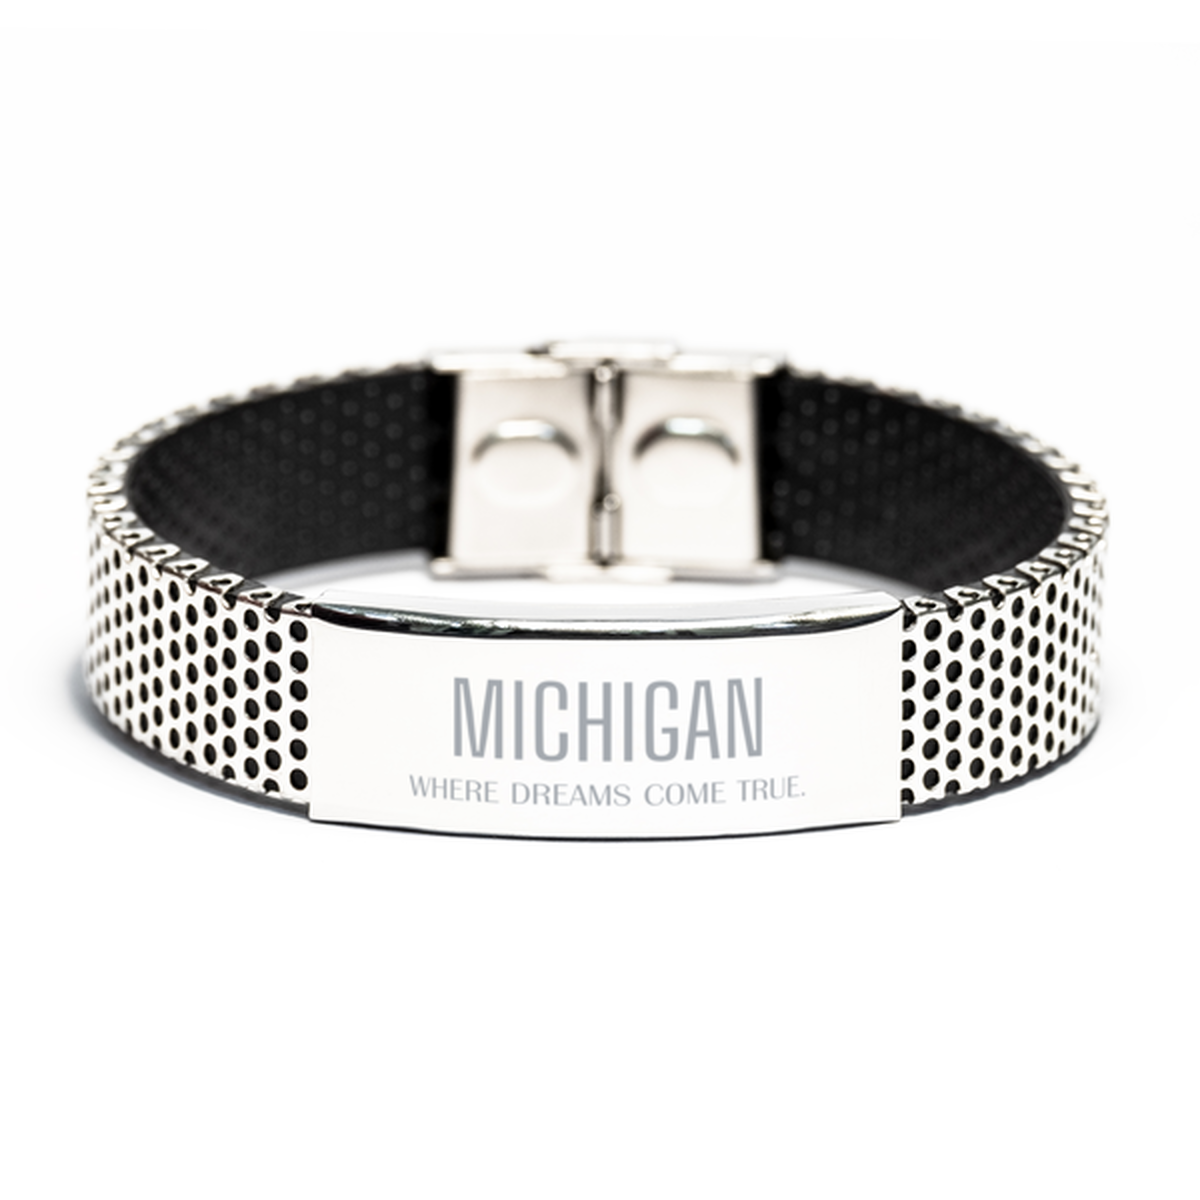 Love Michigan State Stainless Steel Bracelet, Michigan Where dreams come true, Birthday Inspirational Gifts For Michigan Men, Women, Friends